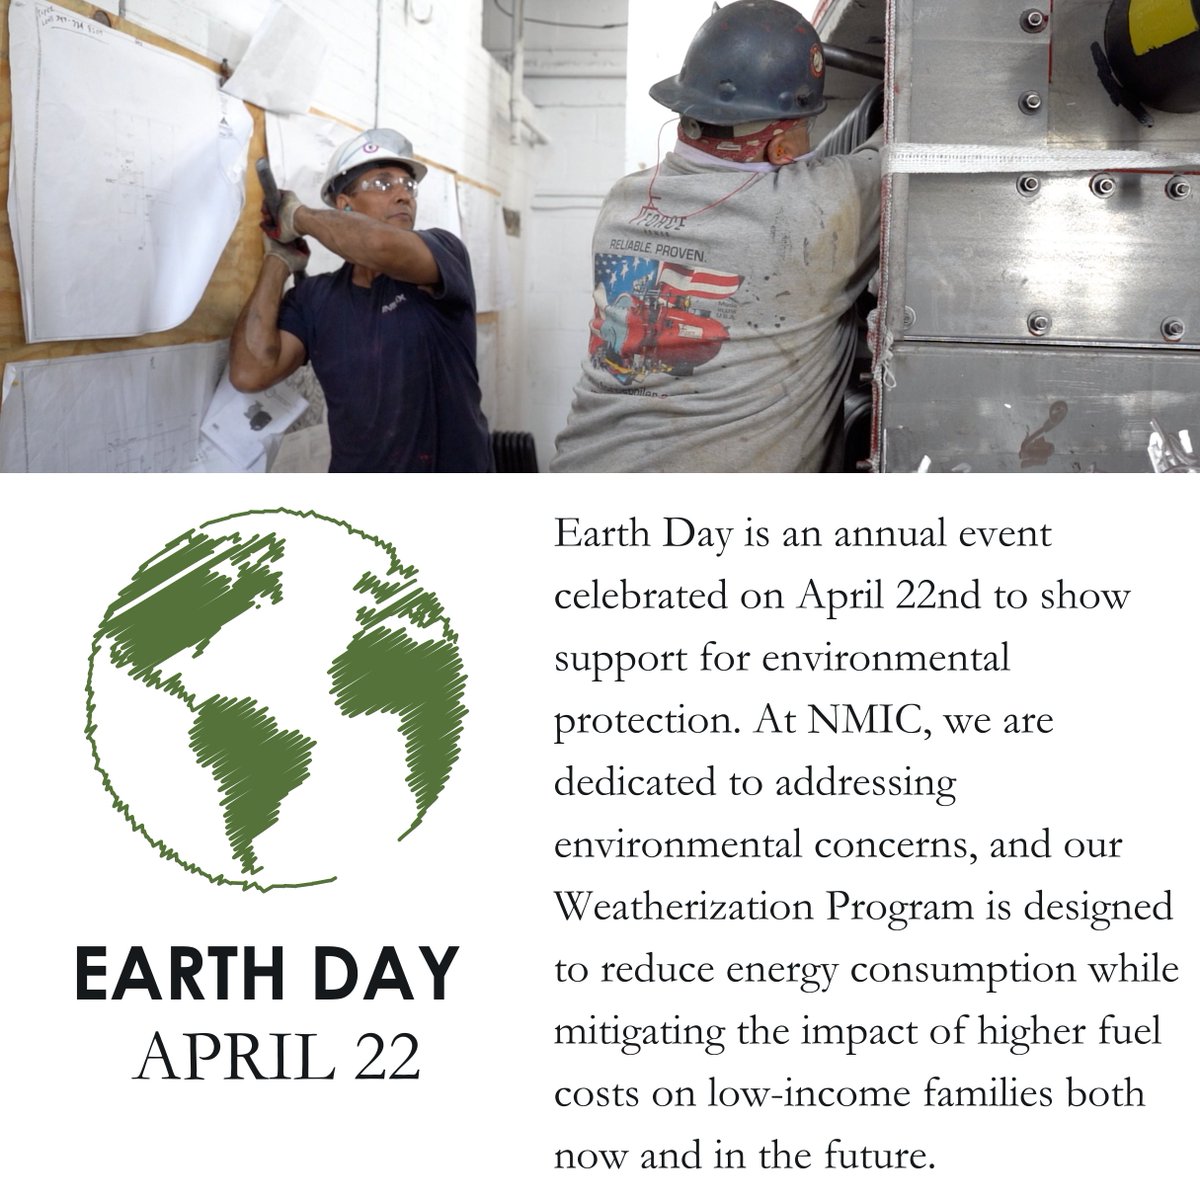 Today is #EarthDay, an annual event celebrated on April 22nd to show support for environmental protection.